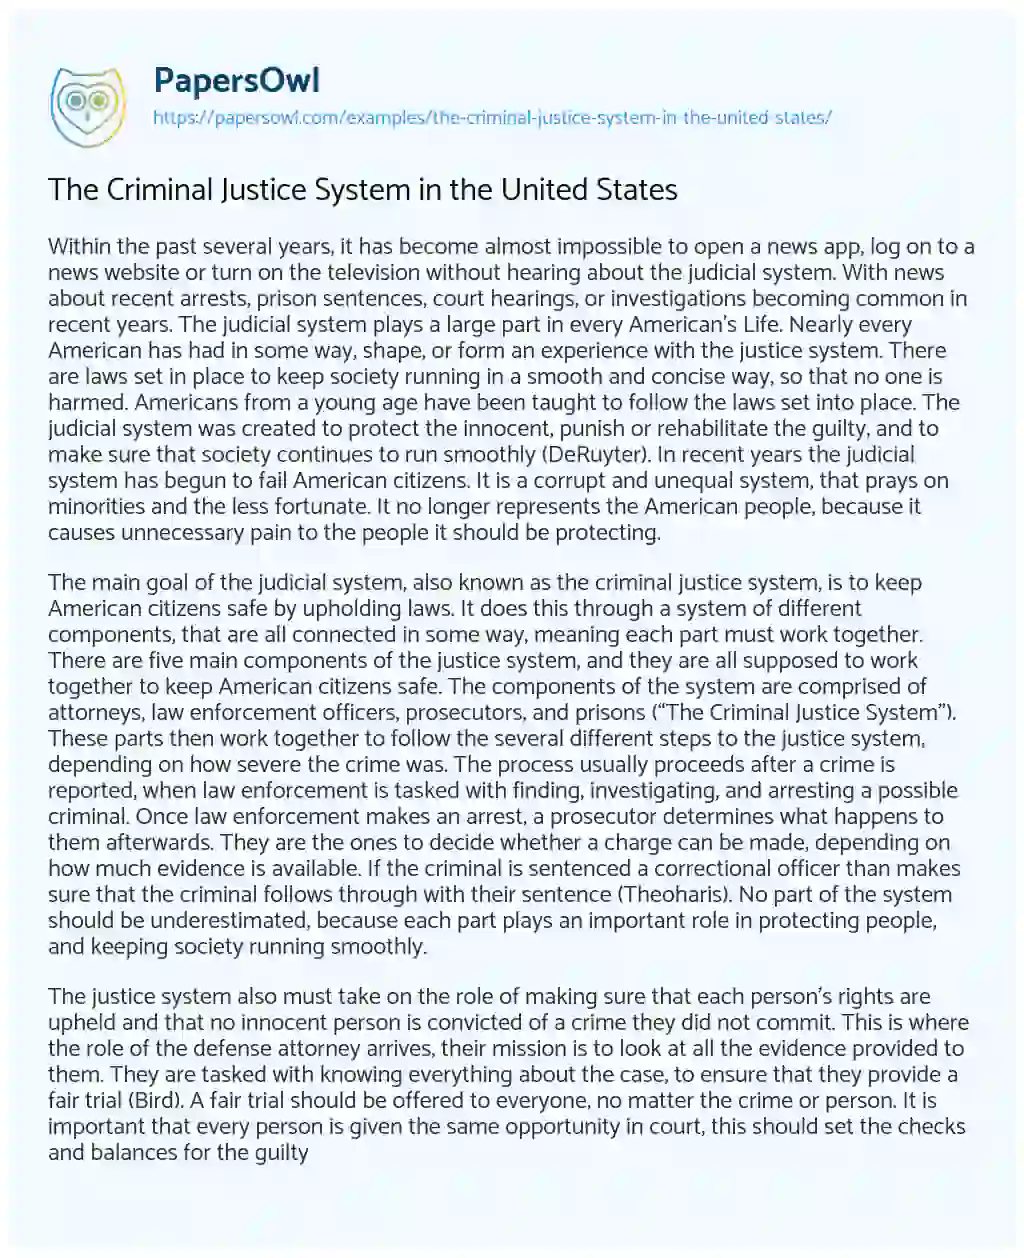 Essay on The Criminal Justice System in the United States